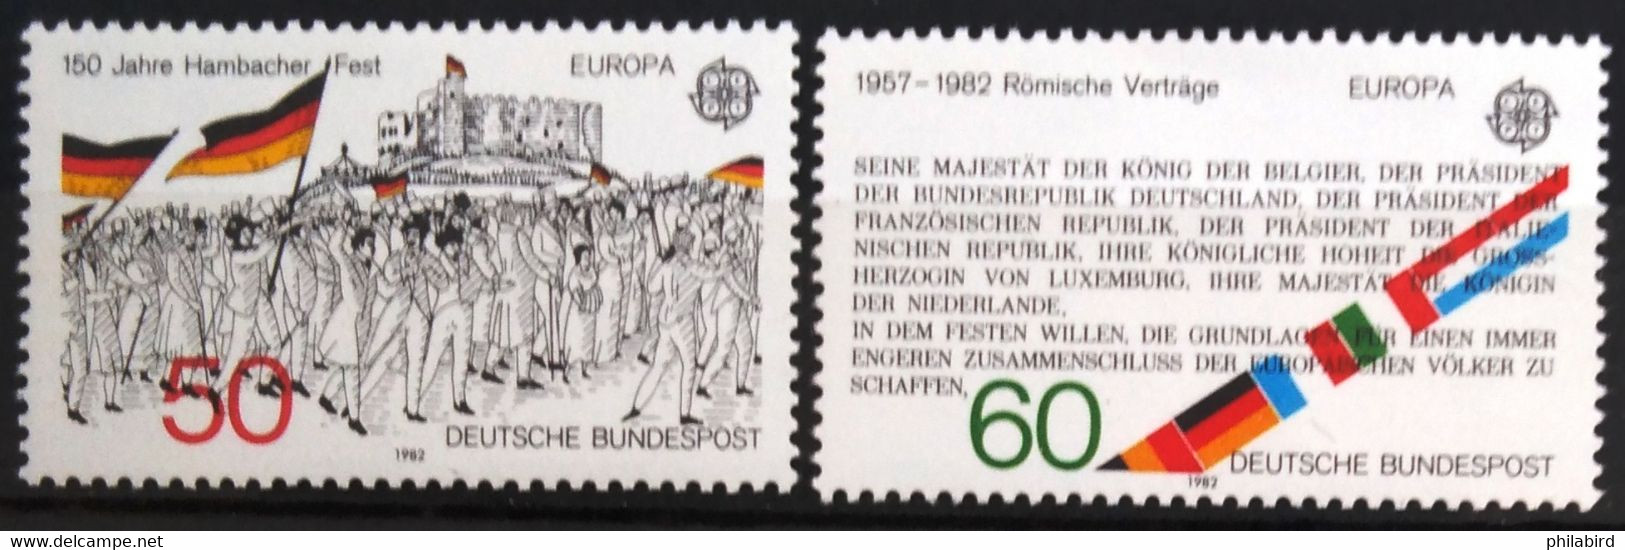 EUROPA 1982 - ALLEMAGNE                 N° 962/963                       NEUF** - 1982